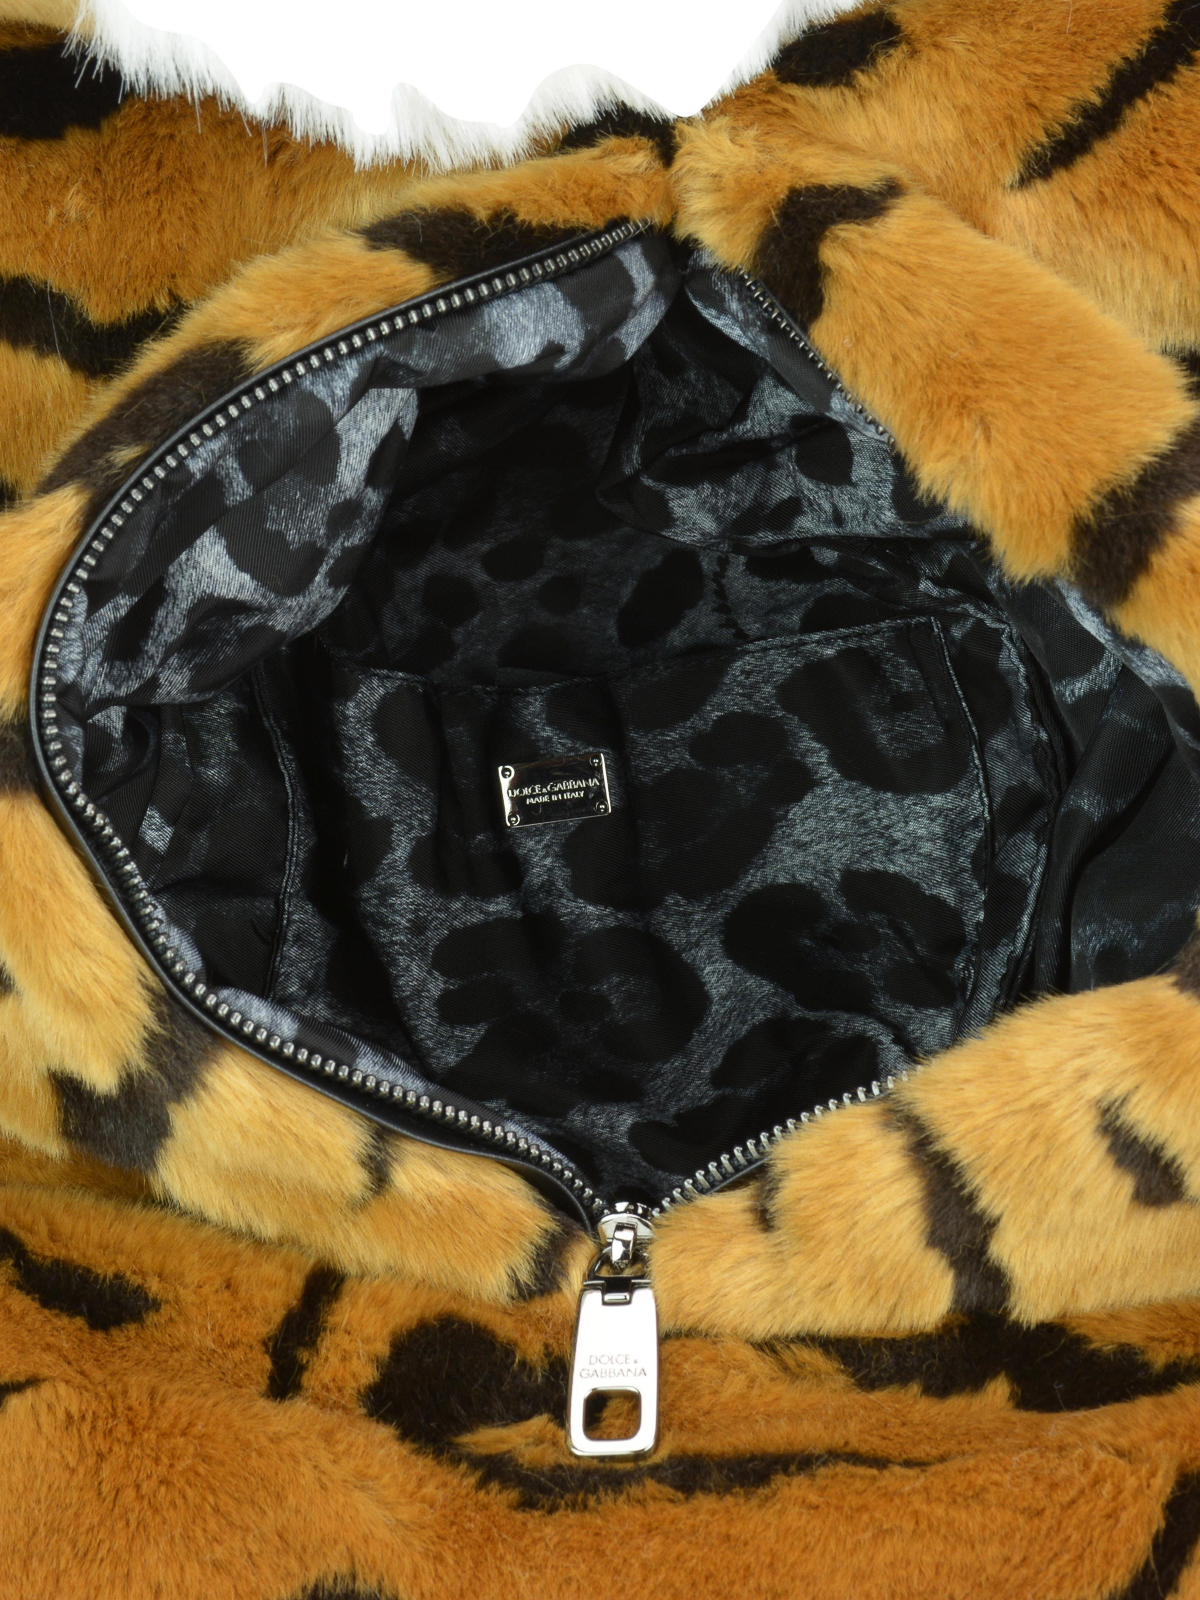 dolce and gabbana tiger backpack